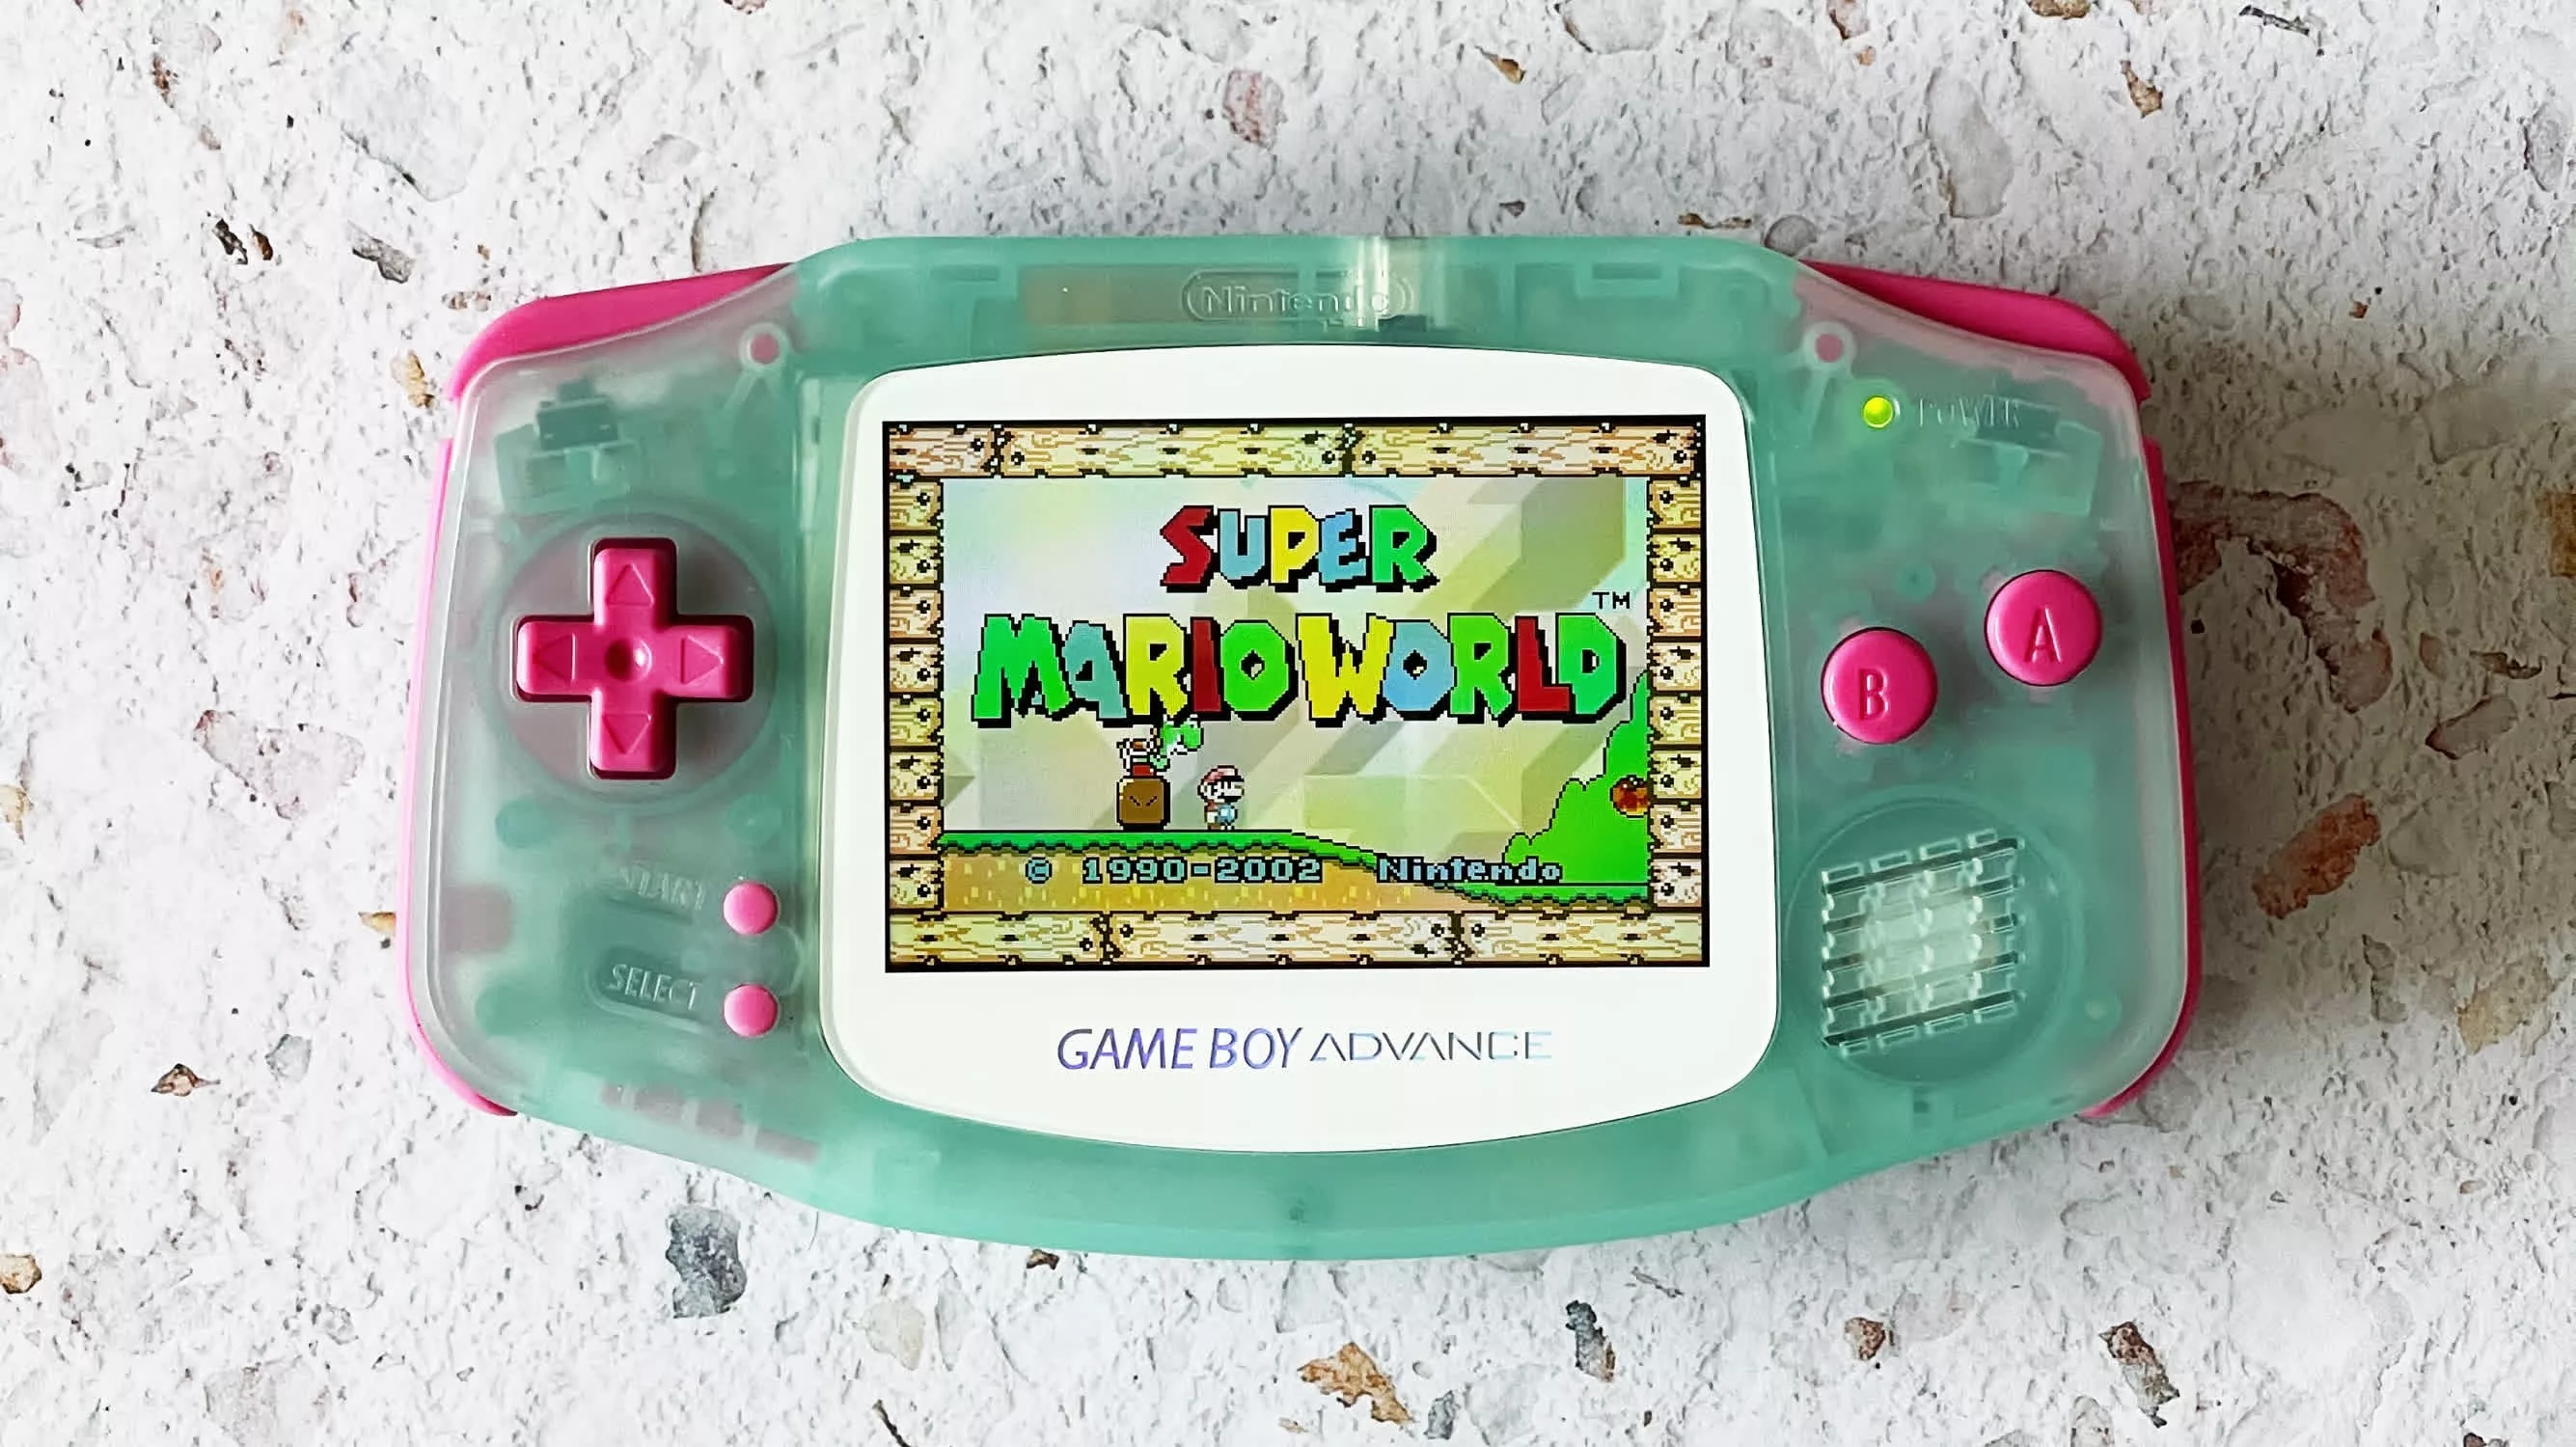 This modder turned a Game Boy Advance into a portable emulator station to play SNES, PS, and Mega Drive games